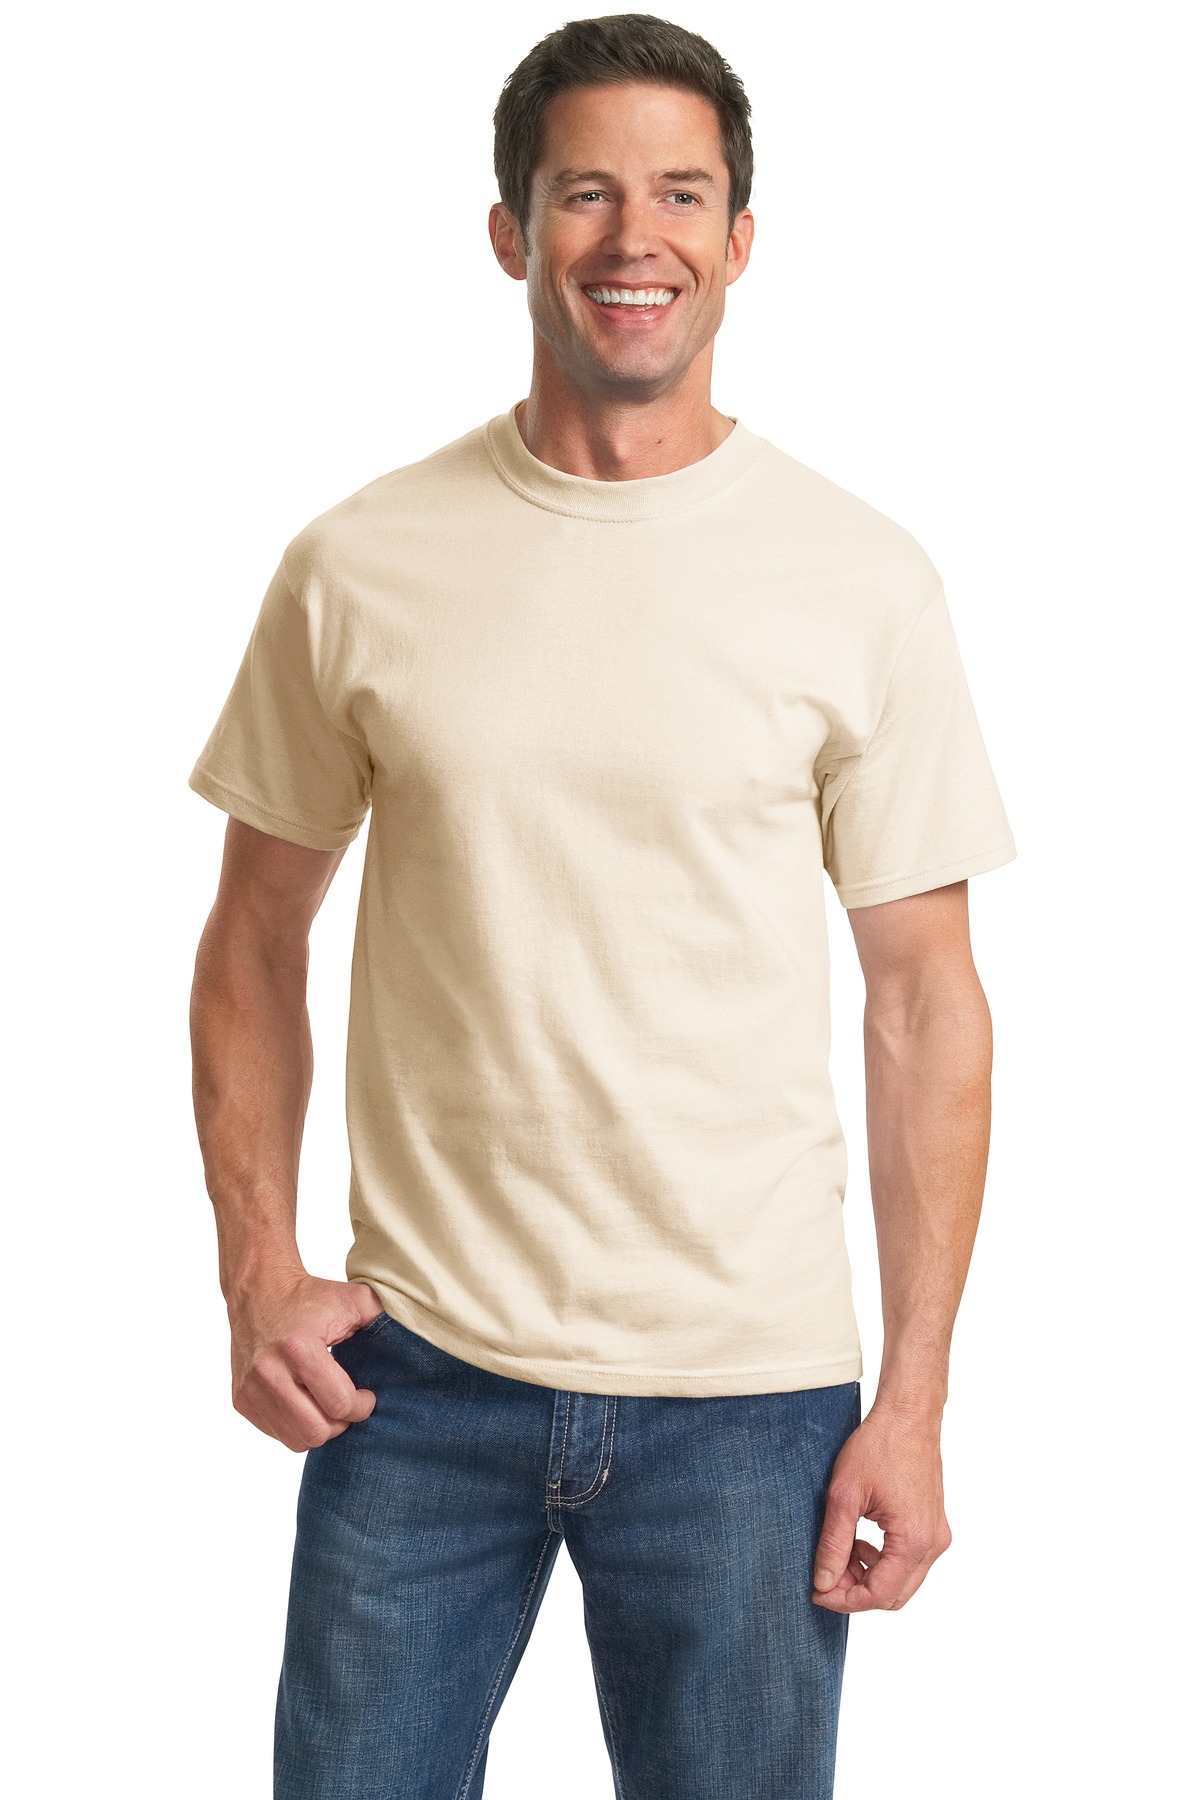 Port and Company - Tall Essential Tee. PC61T